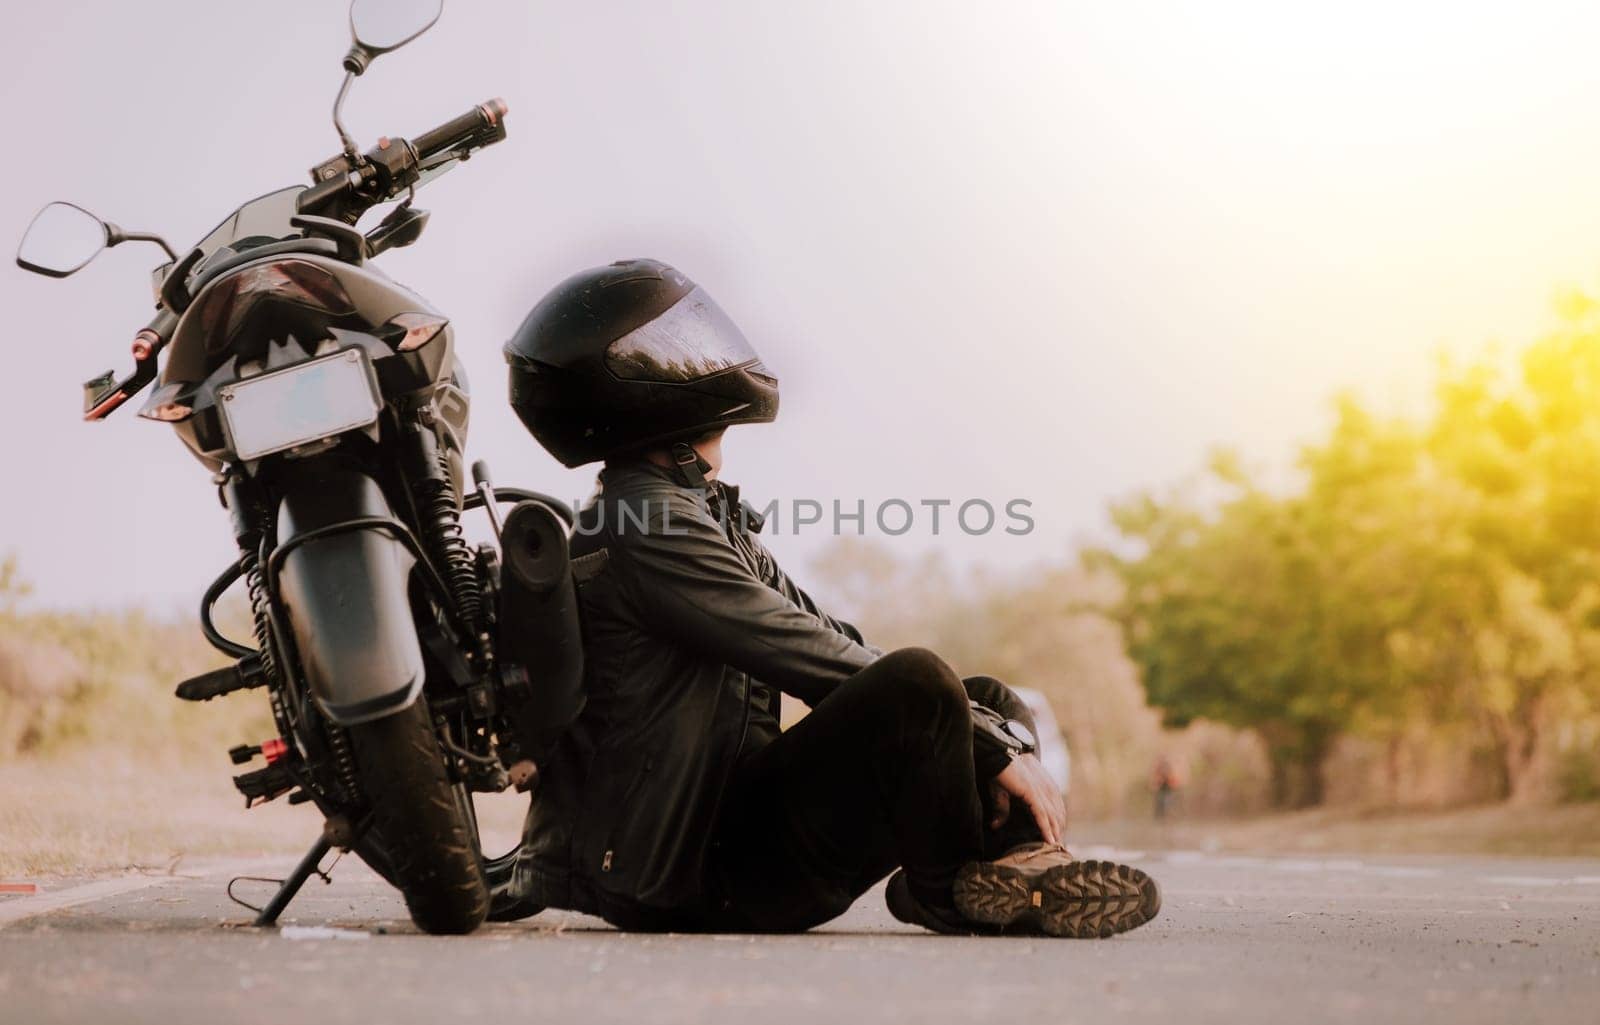 Motorcyclist sitting next to his motorcycle on the road. Motorcyclist sitting and leaning on his motorcycle on the asphalt by isaiphoto